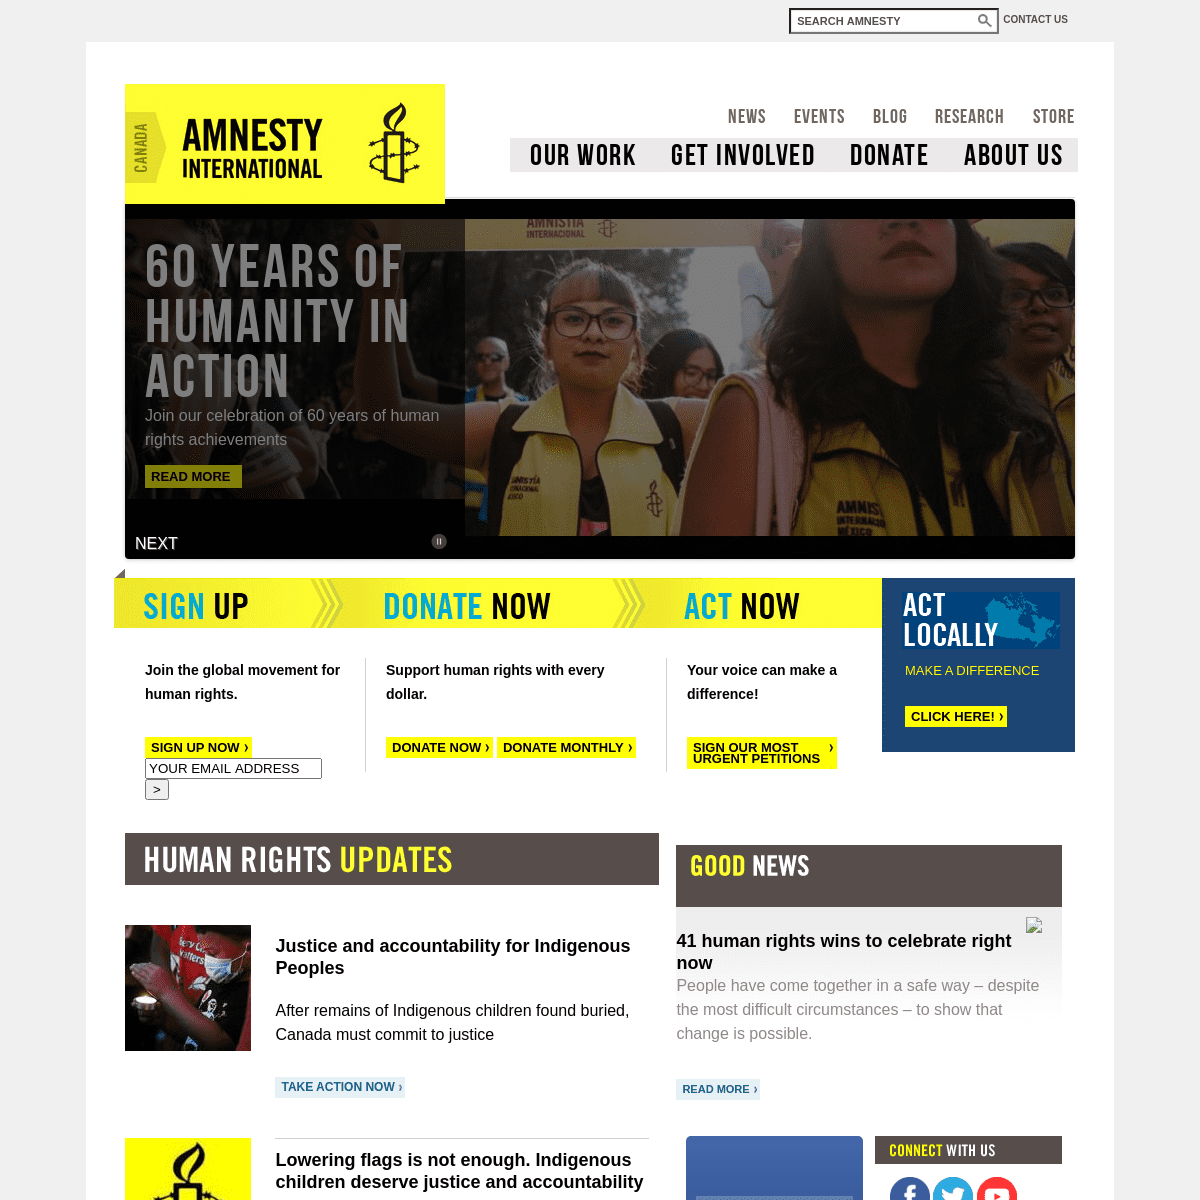 A complete backup of https://amnesty.ca